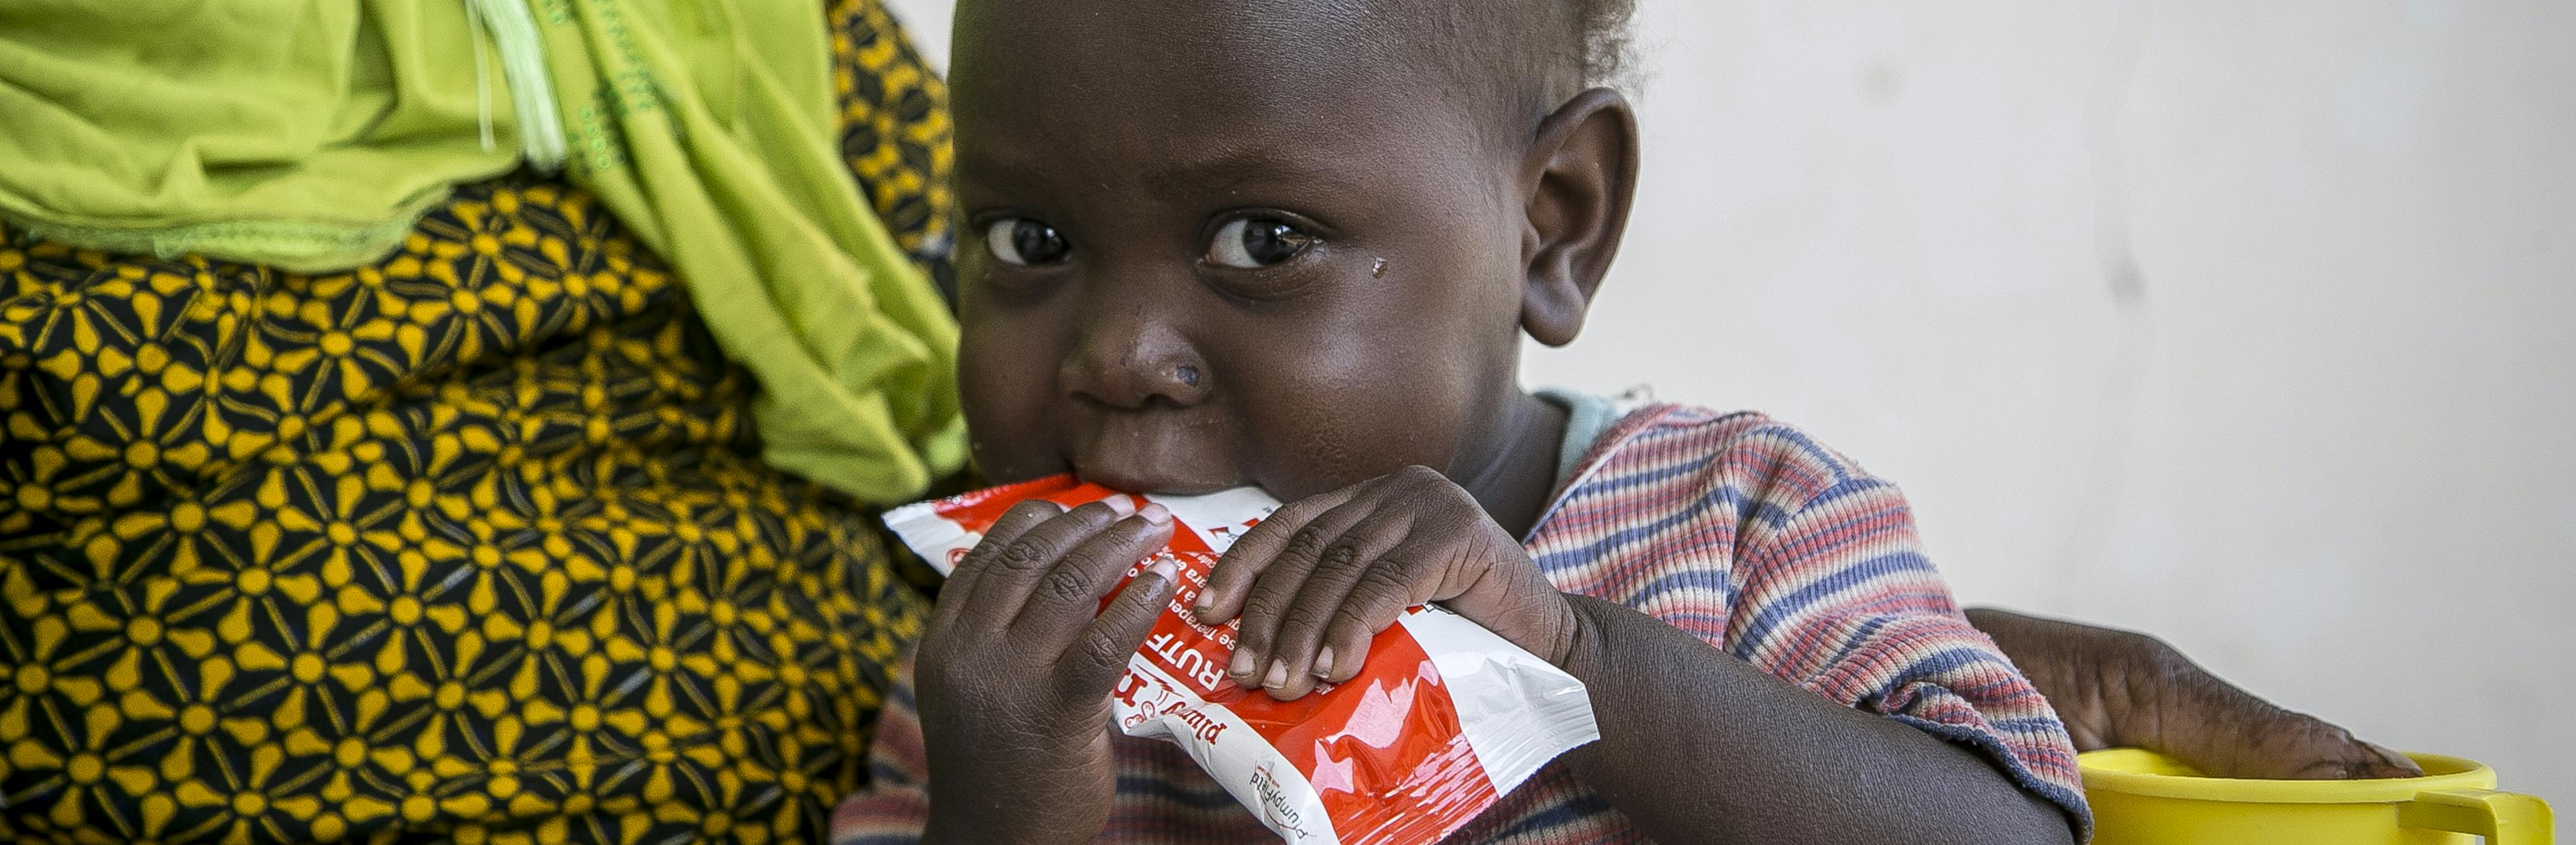 Oumou Bah, 2, eating ready-to-use therapeutic food 